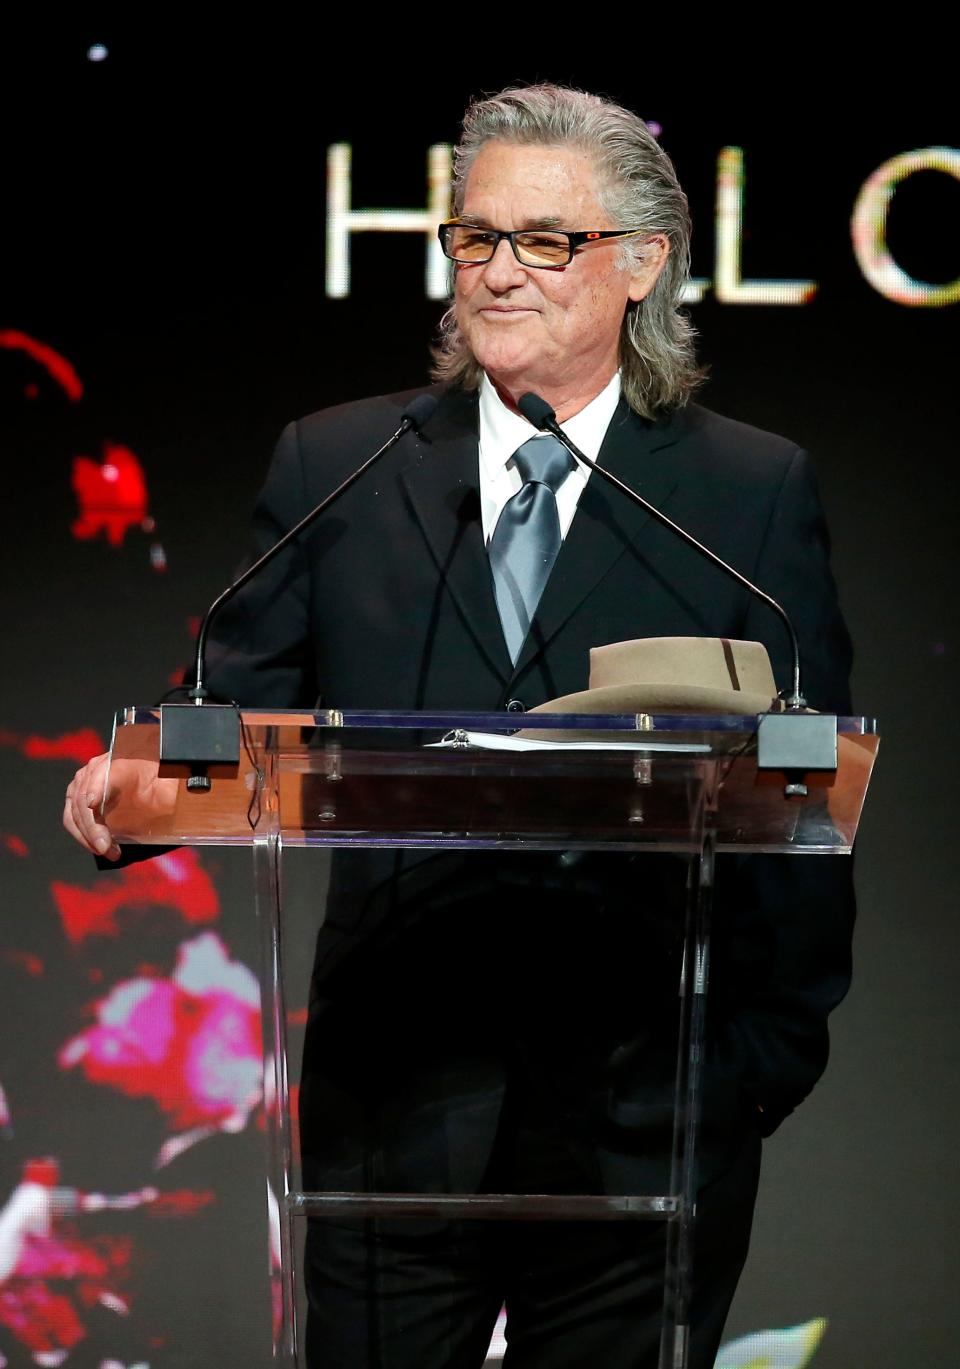 Kurt Russell speaks before accepting the 2022 Hall of Great Western Performers during the Western Heritage Awards at the National Cowboy & Western Heritage Museum in Oklahoma City, Saturday, April, 9, 2022. His father Mr. Neil Oliver "Bing" Russell was also a honoree. 